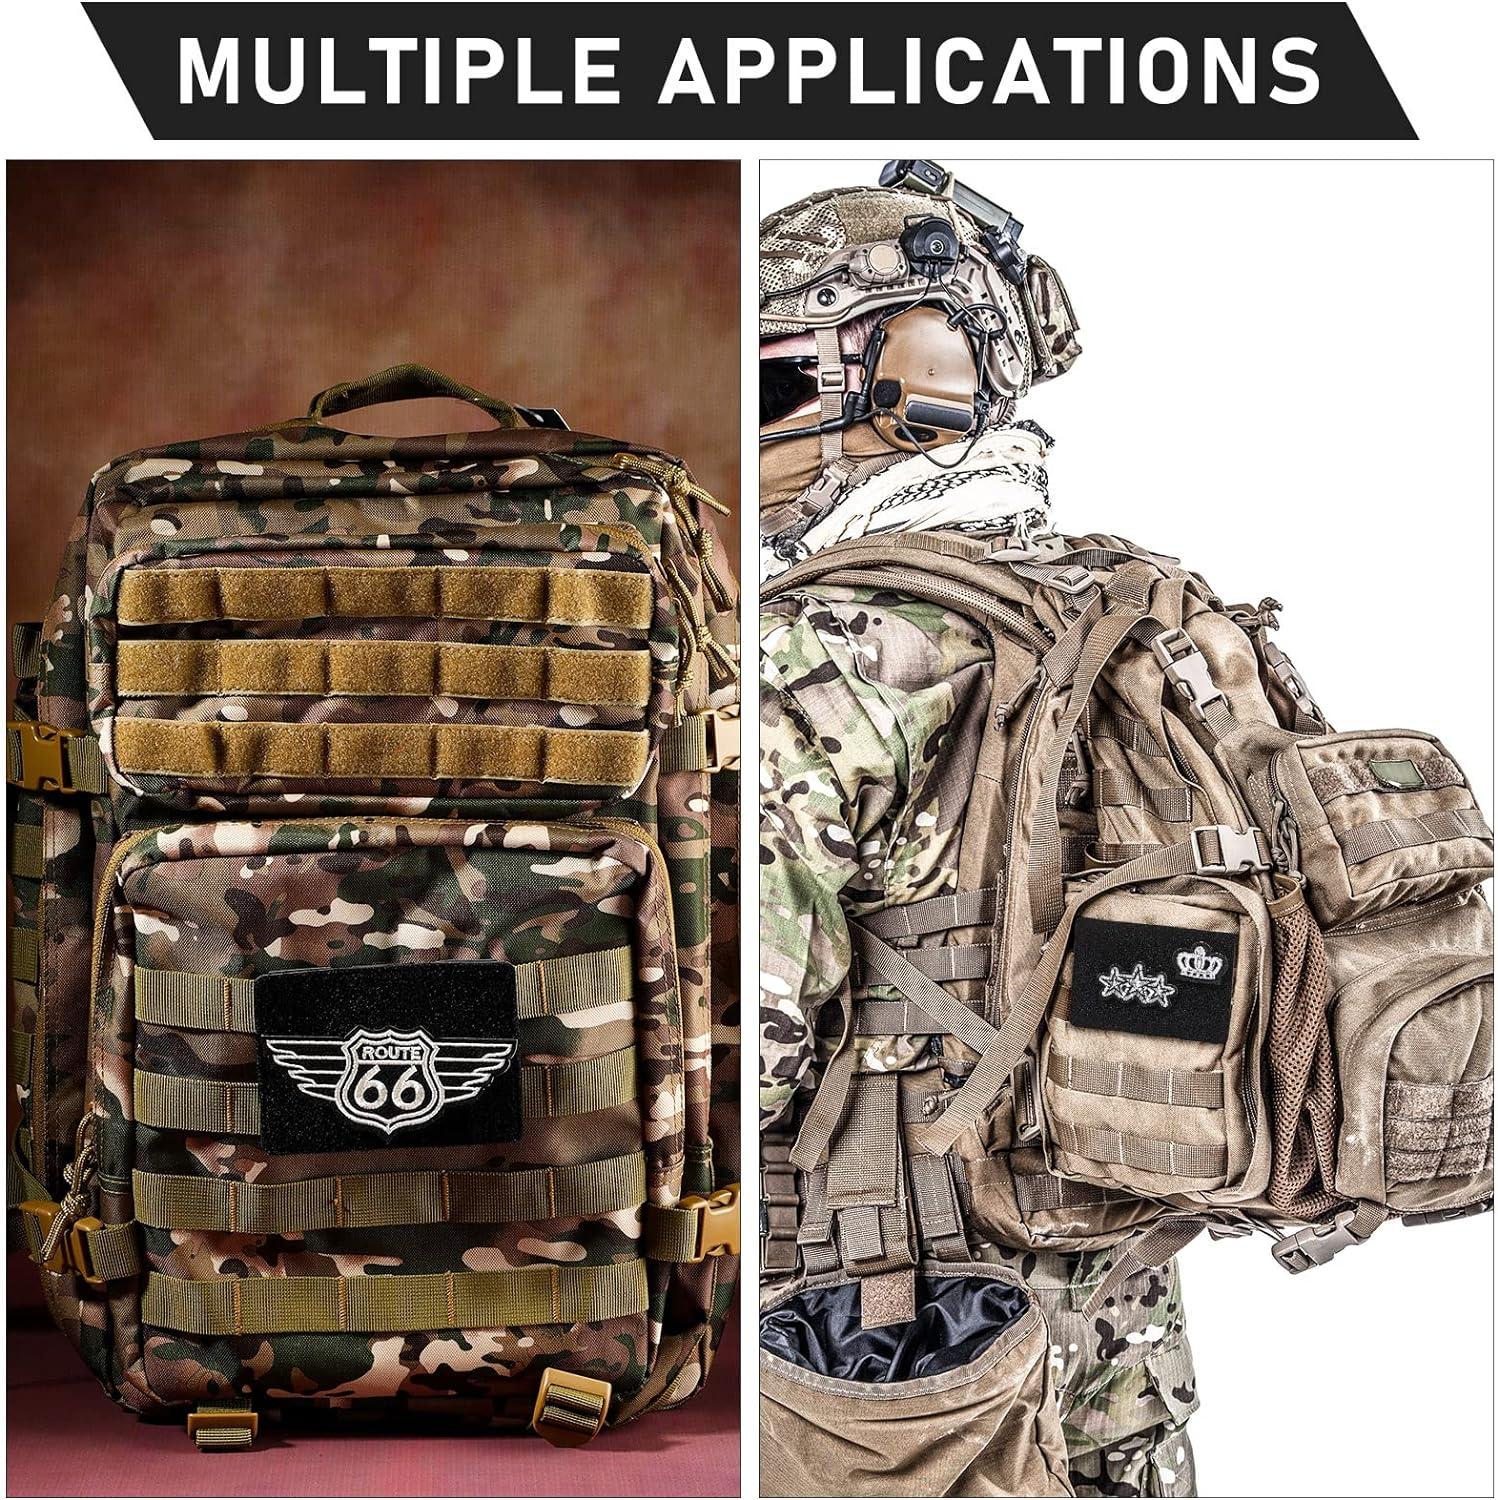 3 Pieces Molle Patches Attachment Tactical Patch Display Board